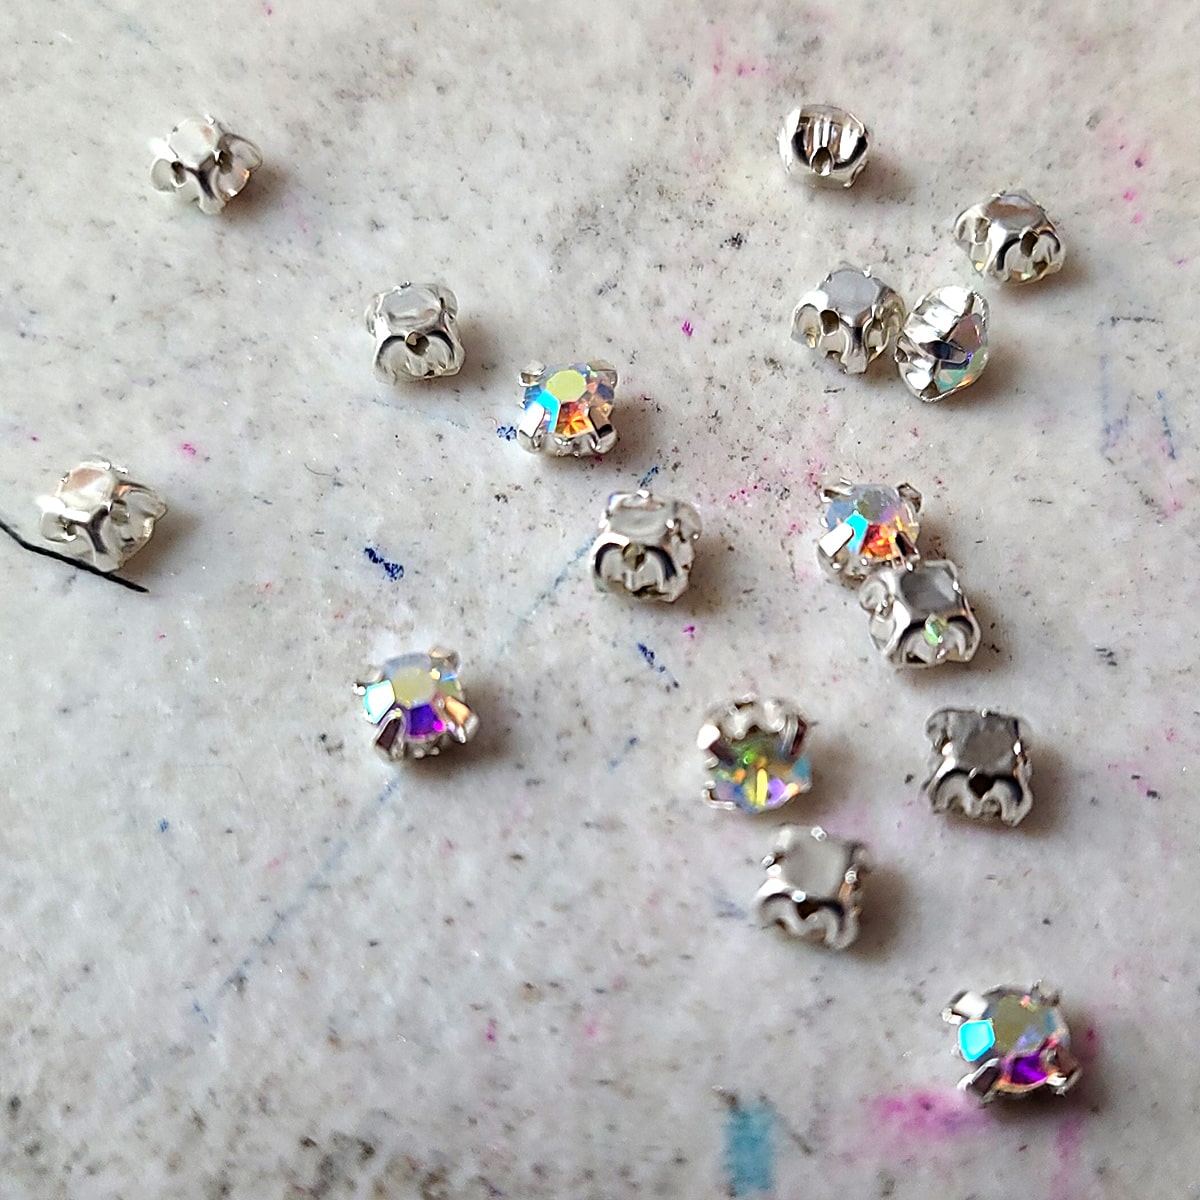 A small handful of round rhinestones in silver coloured prong settings, scattered on a grey work surface.